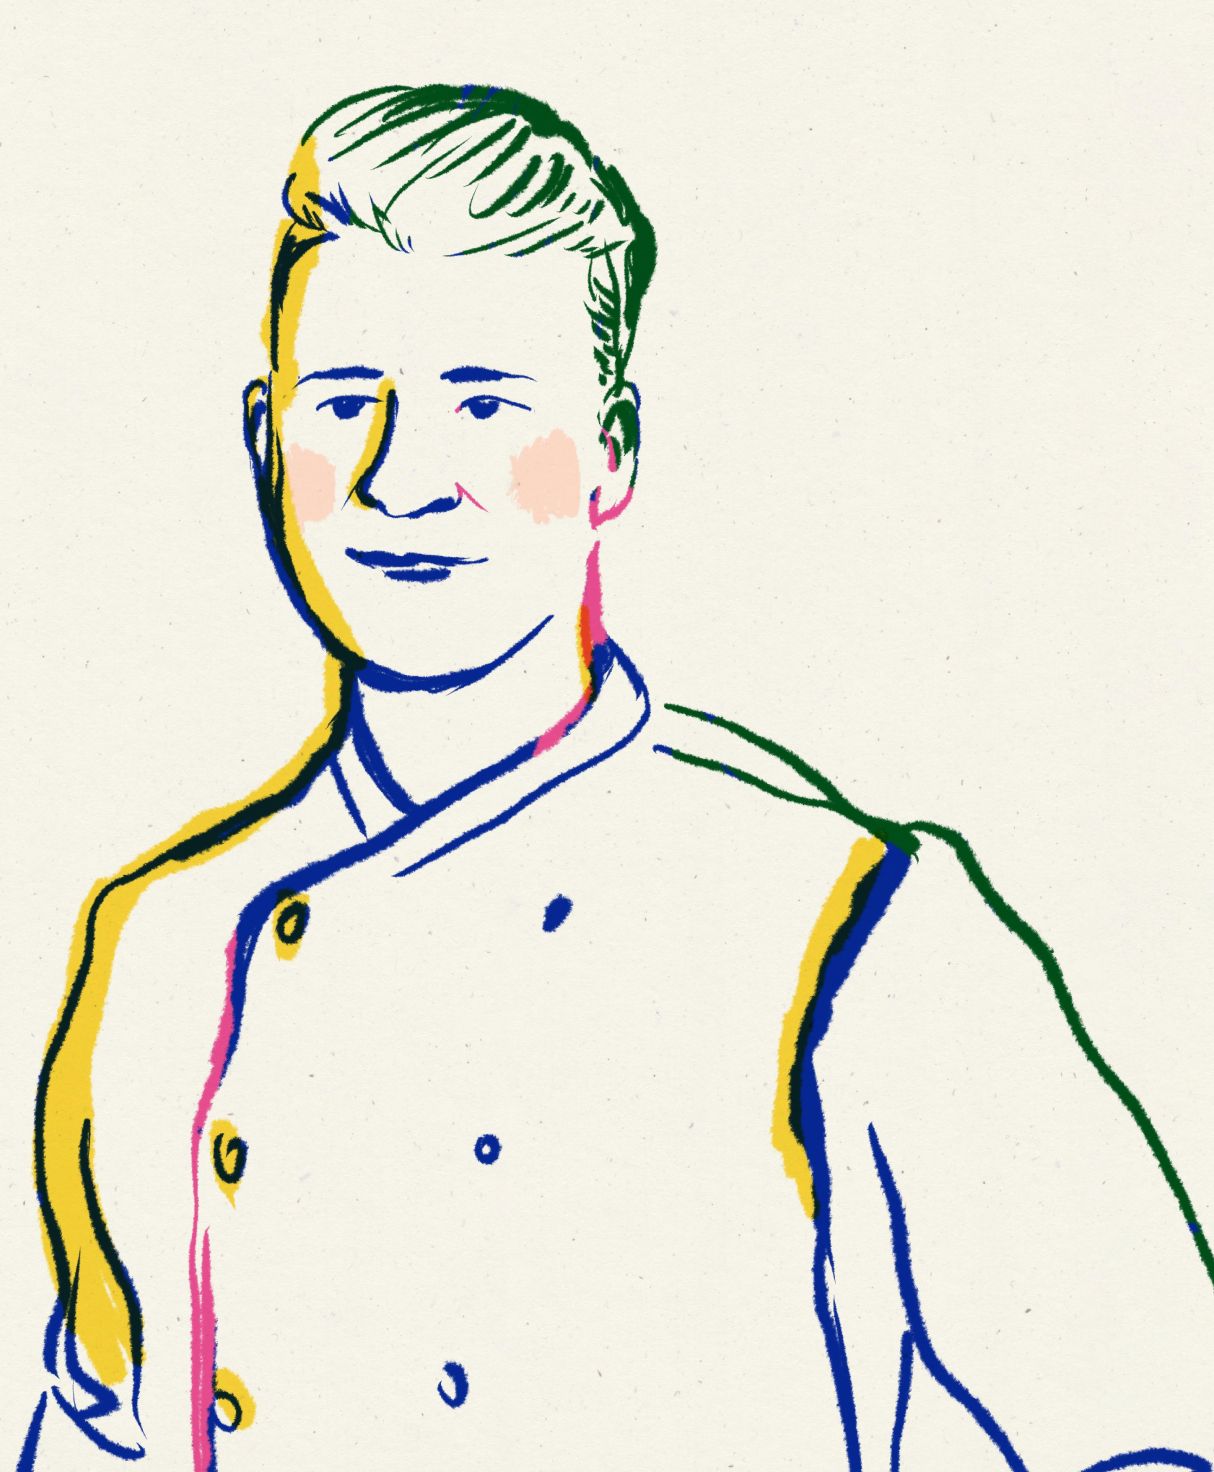 A stylized drawing of a chef with a classic chef's coat